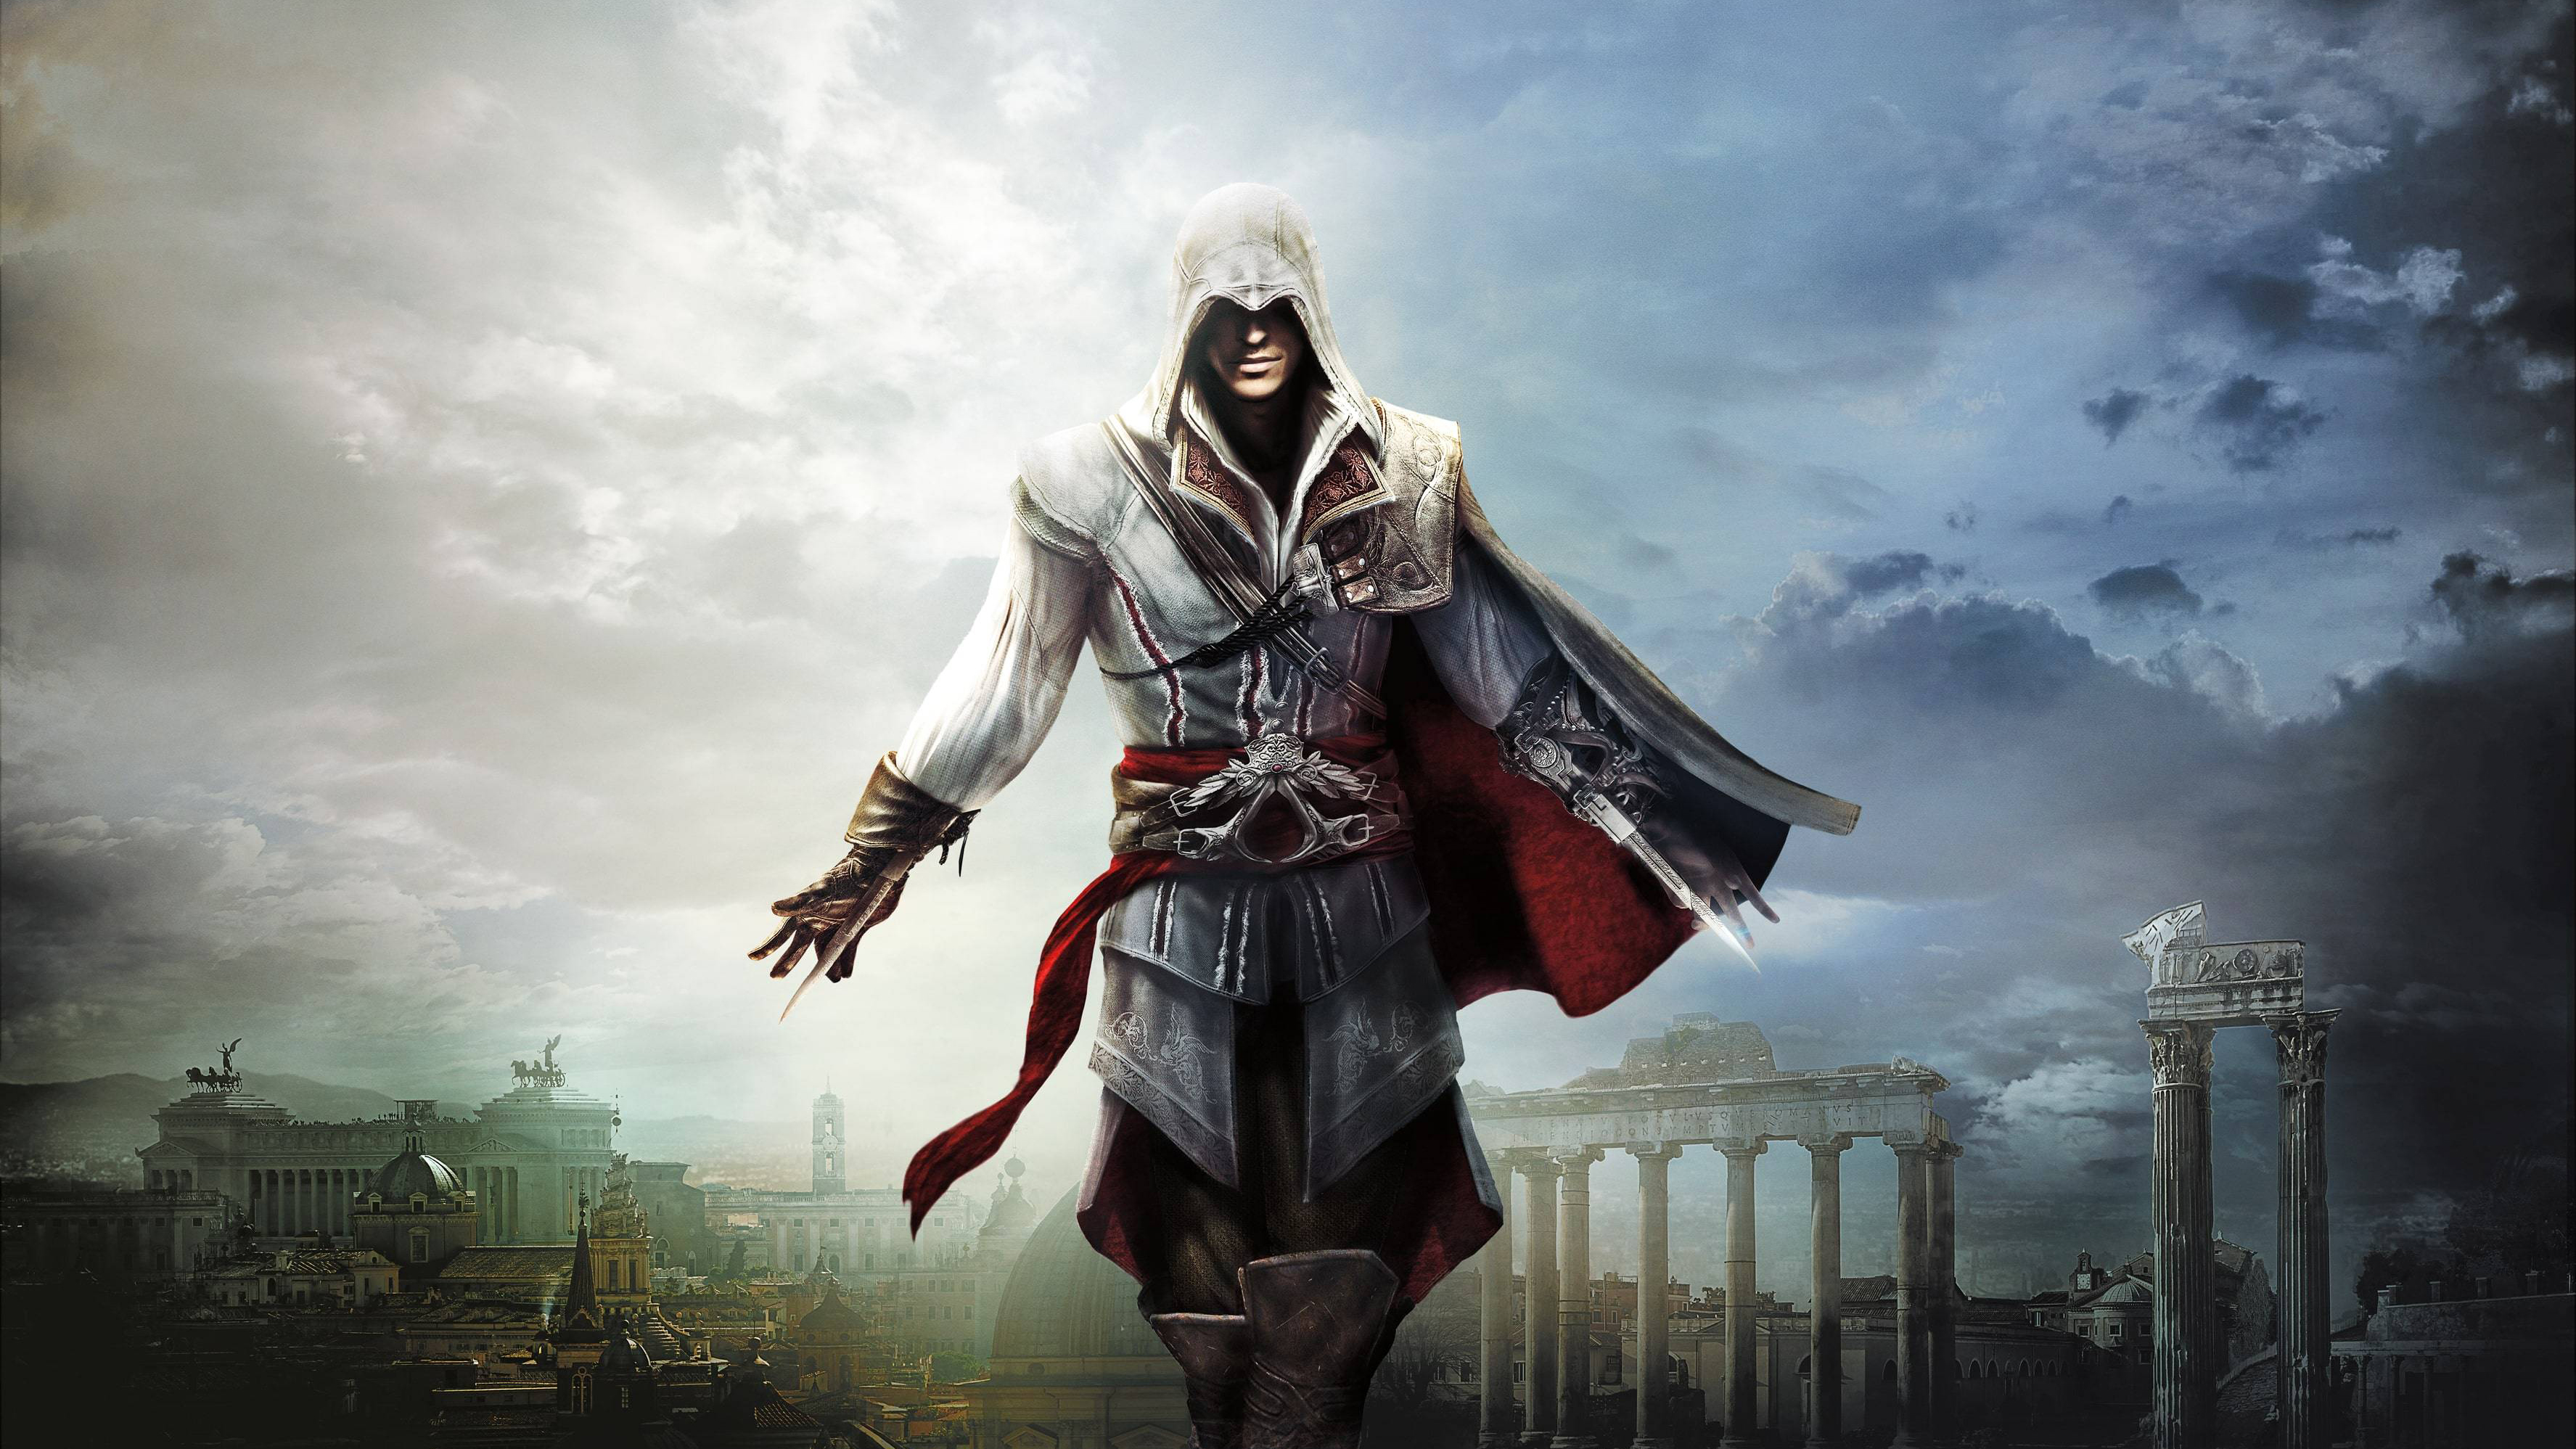 Windows Backgrounds video game, assassin's creed ii, ezio (assassin's creed), assassin's creed